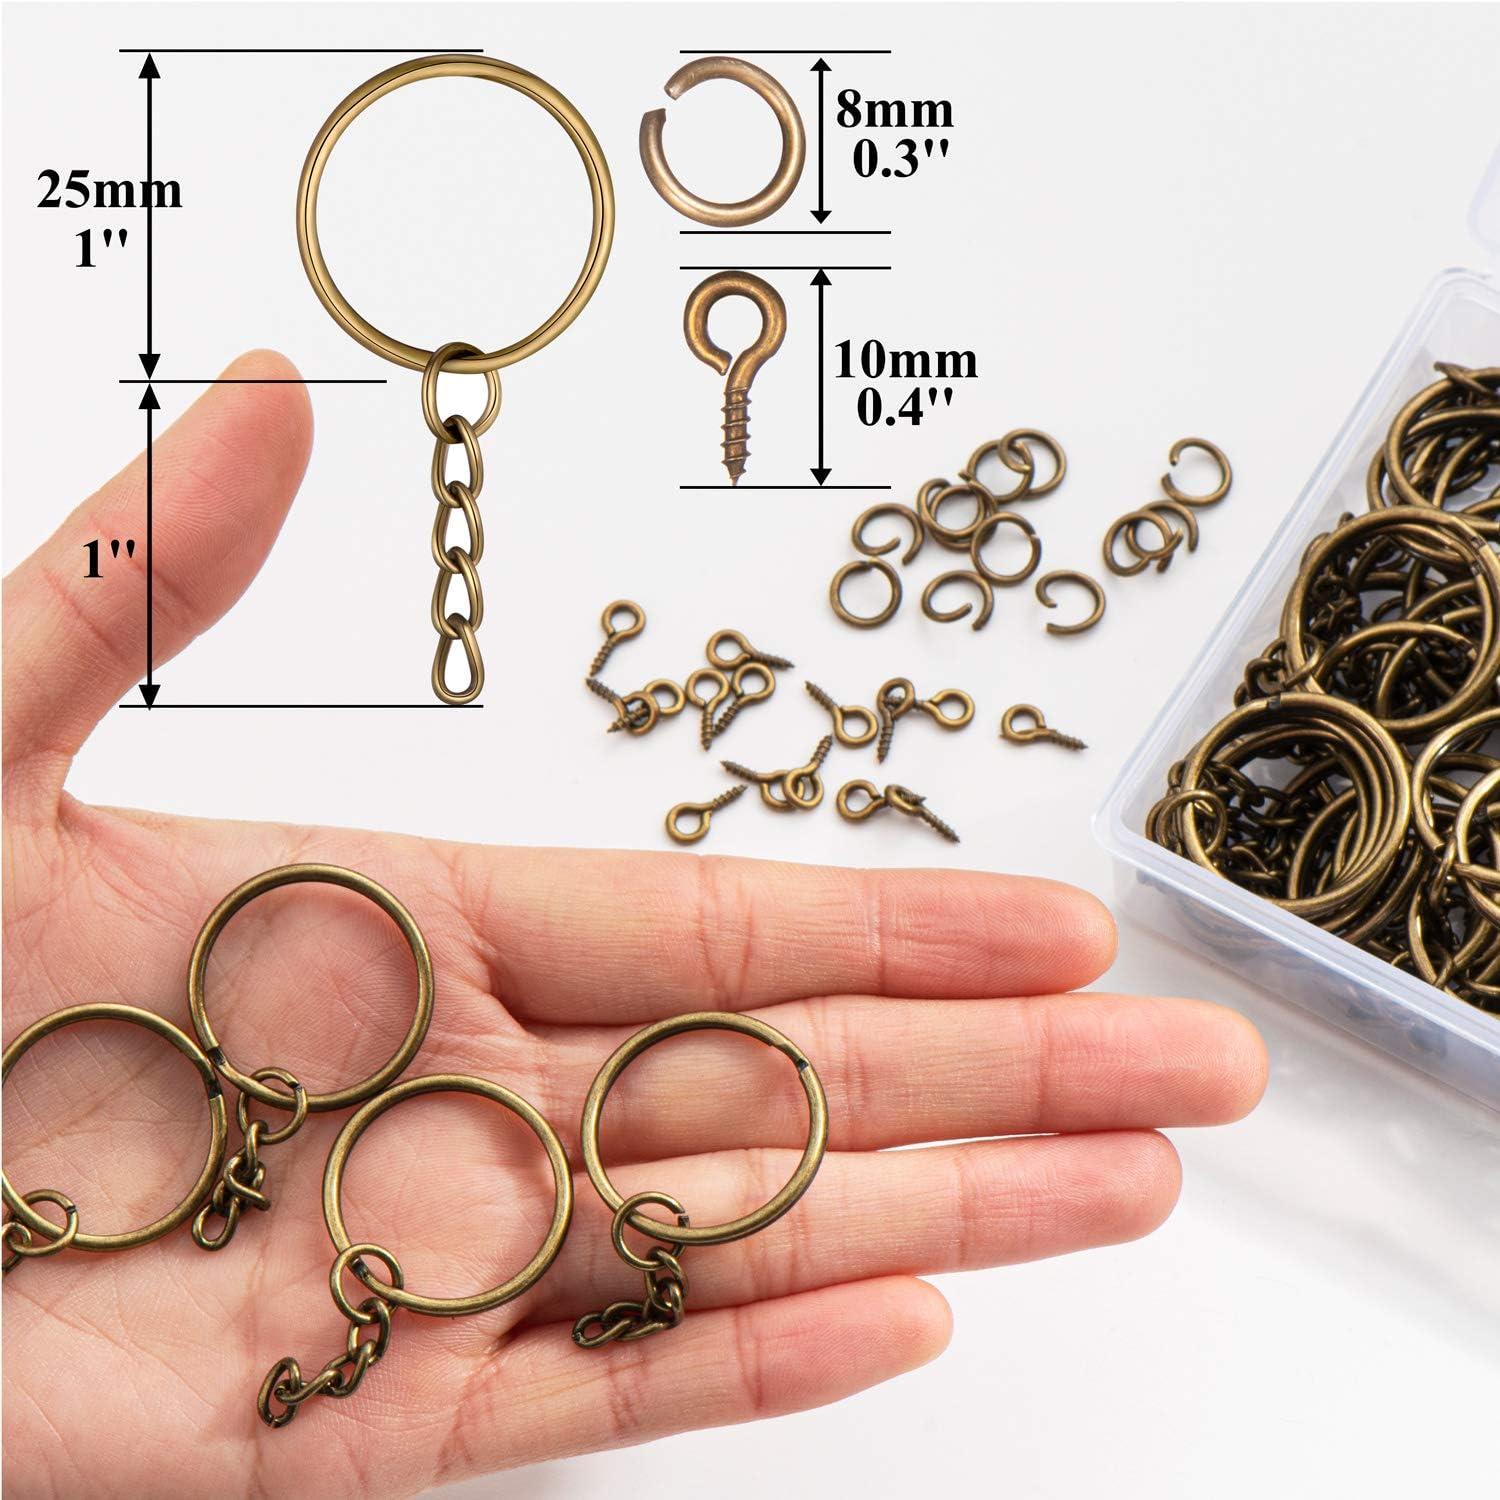 Split Key Ring with Chain Open Jump Ring and Screw Eye Pins 1 Inch